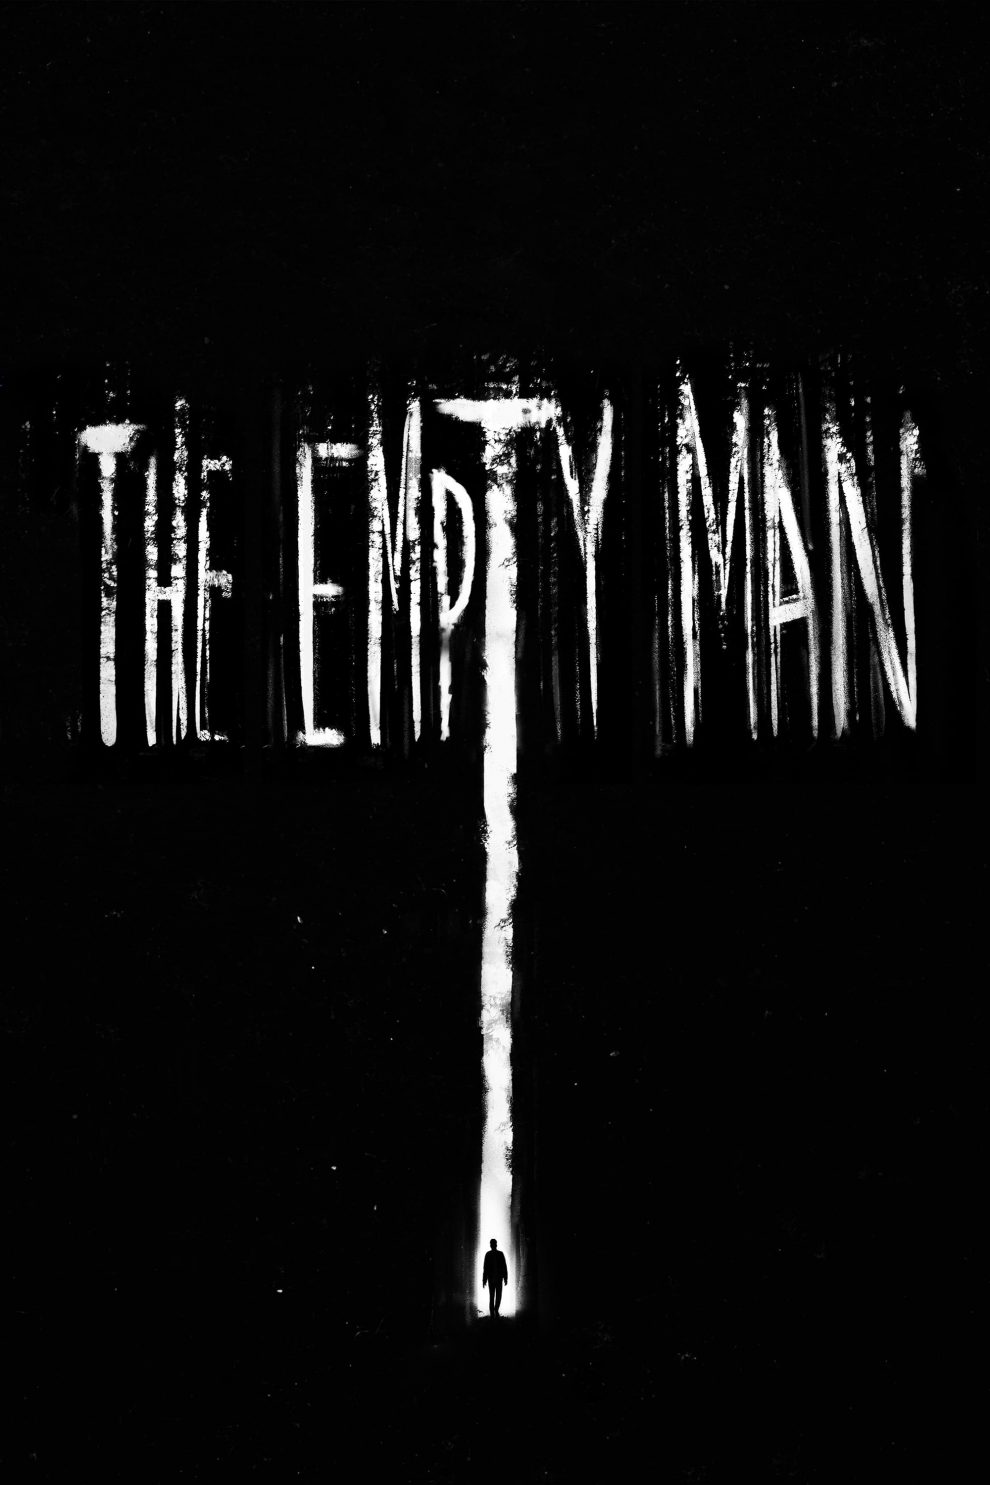 Poster for the movie "The Empty Man"